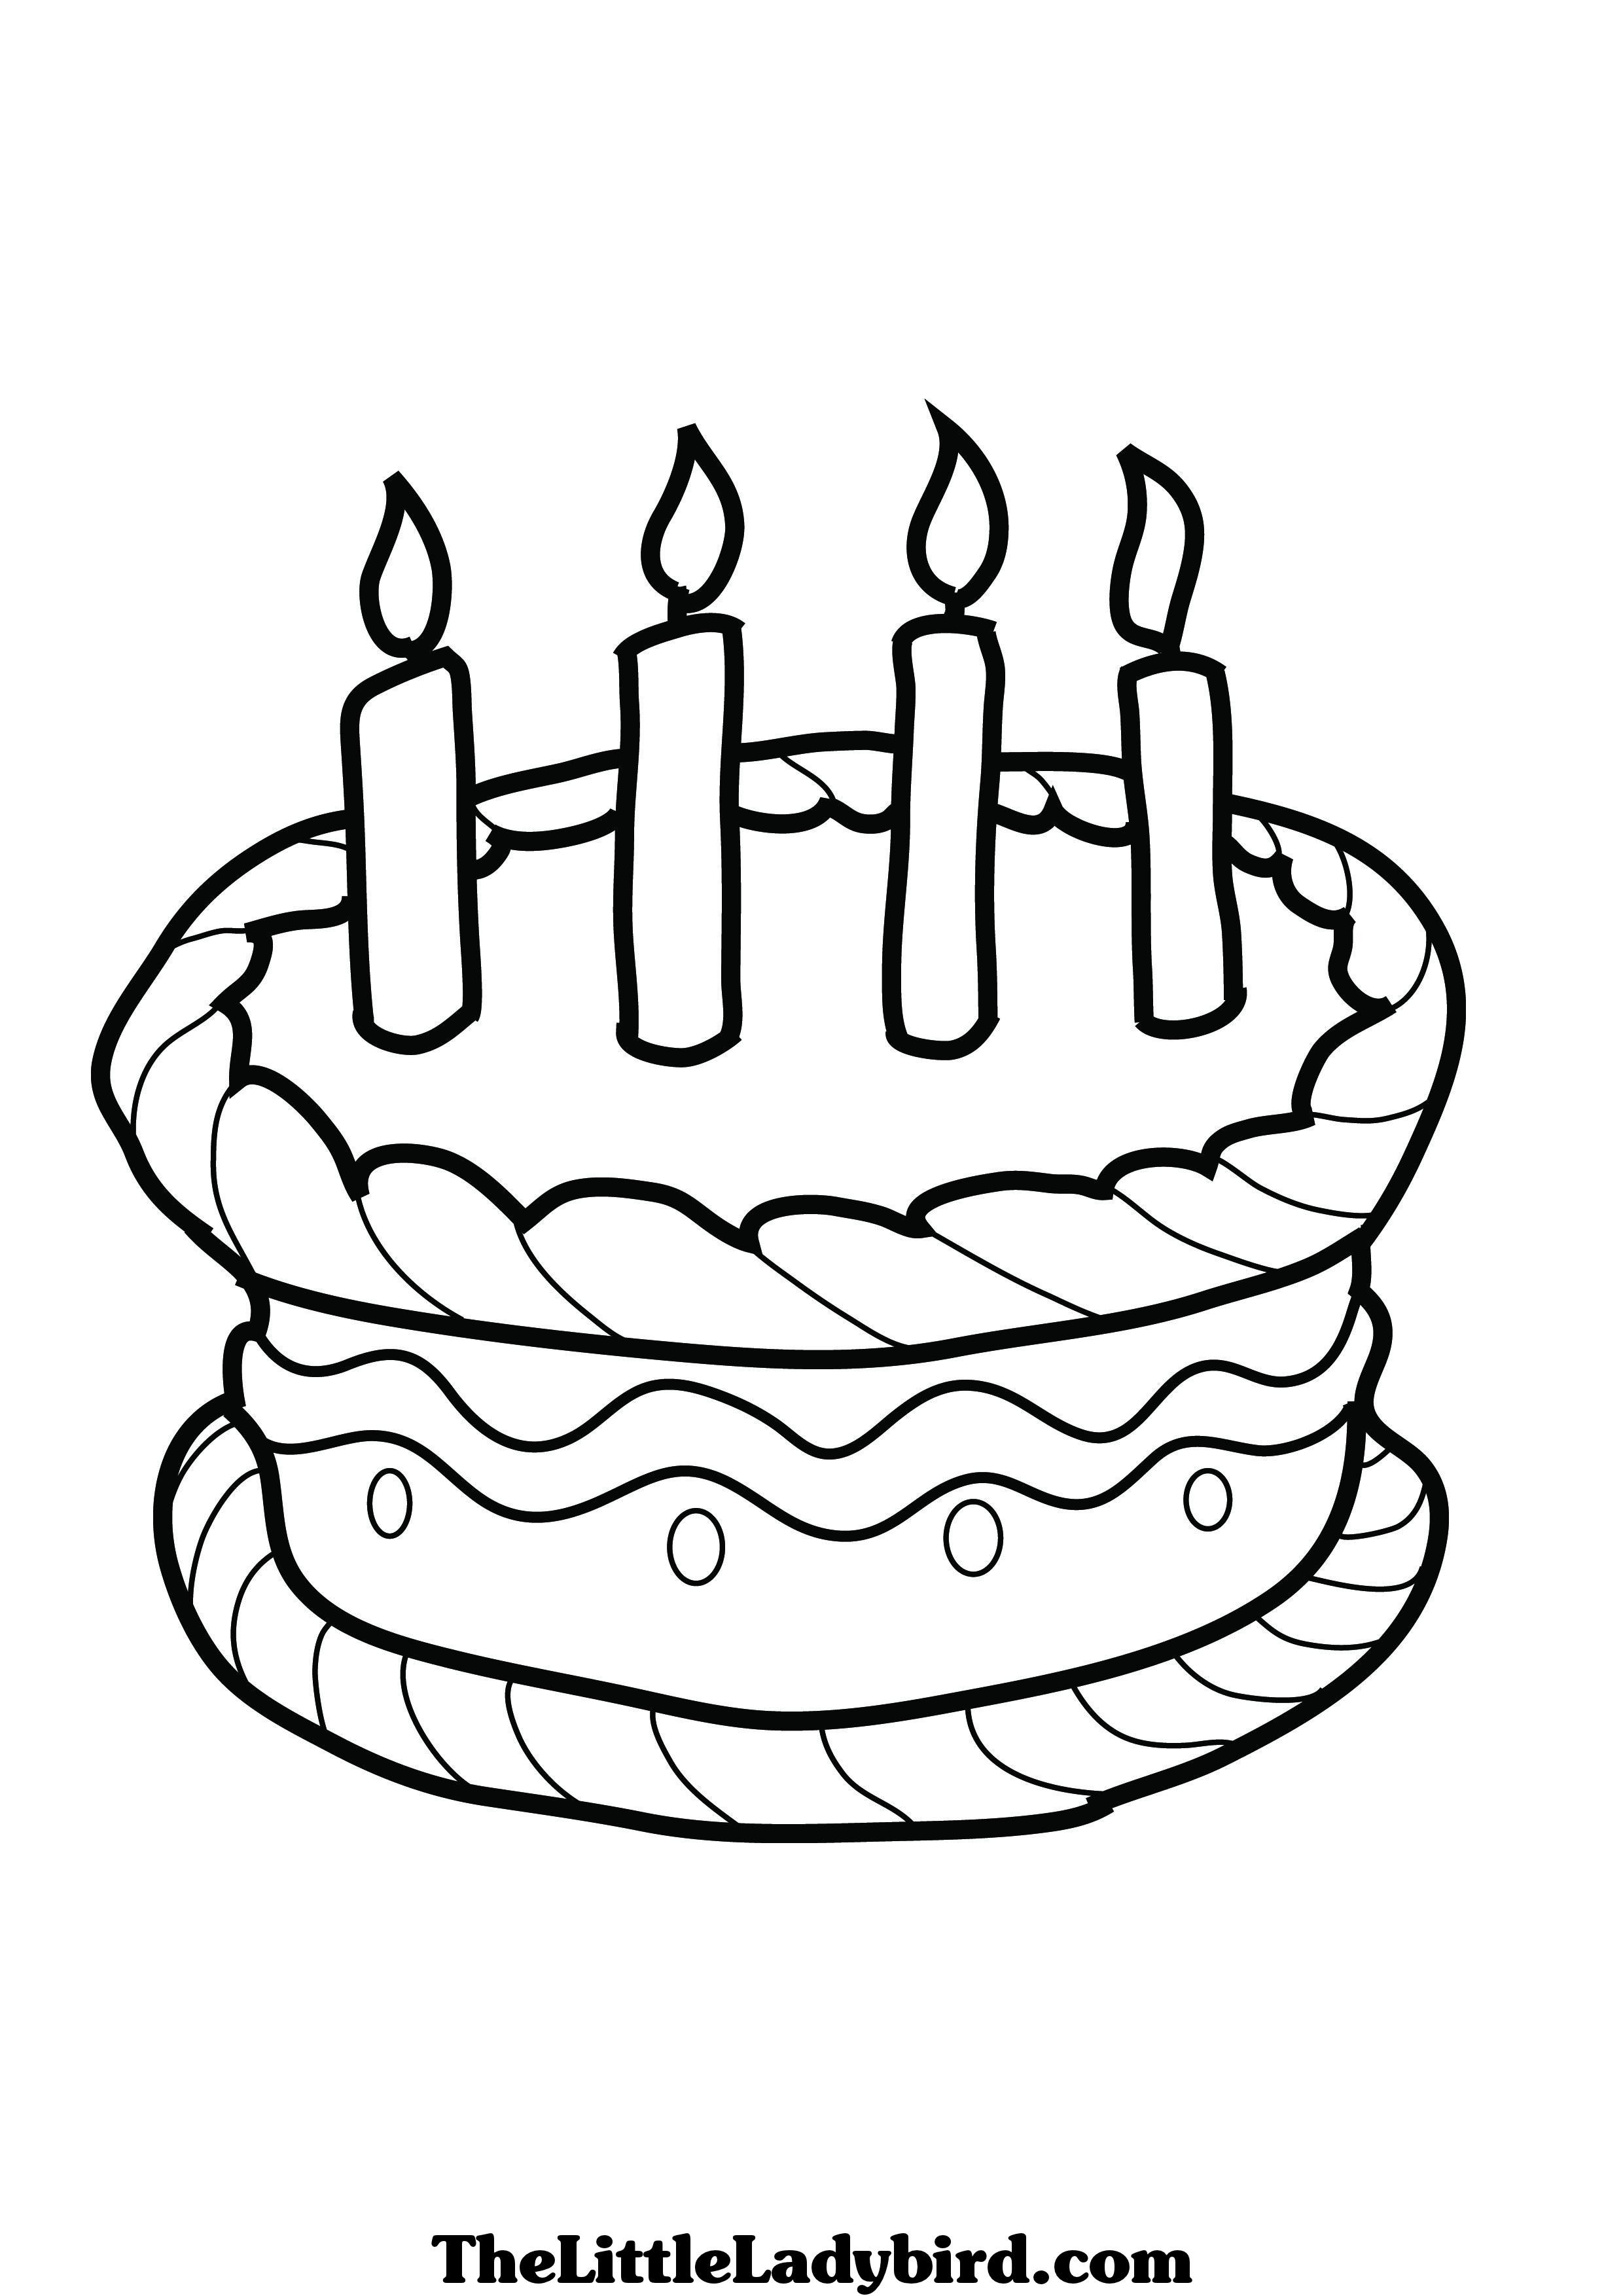 Slice Of Cake Coloring Page at GetDrawings | Free download